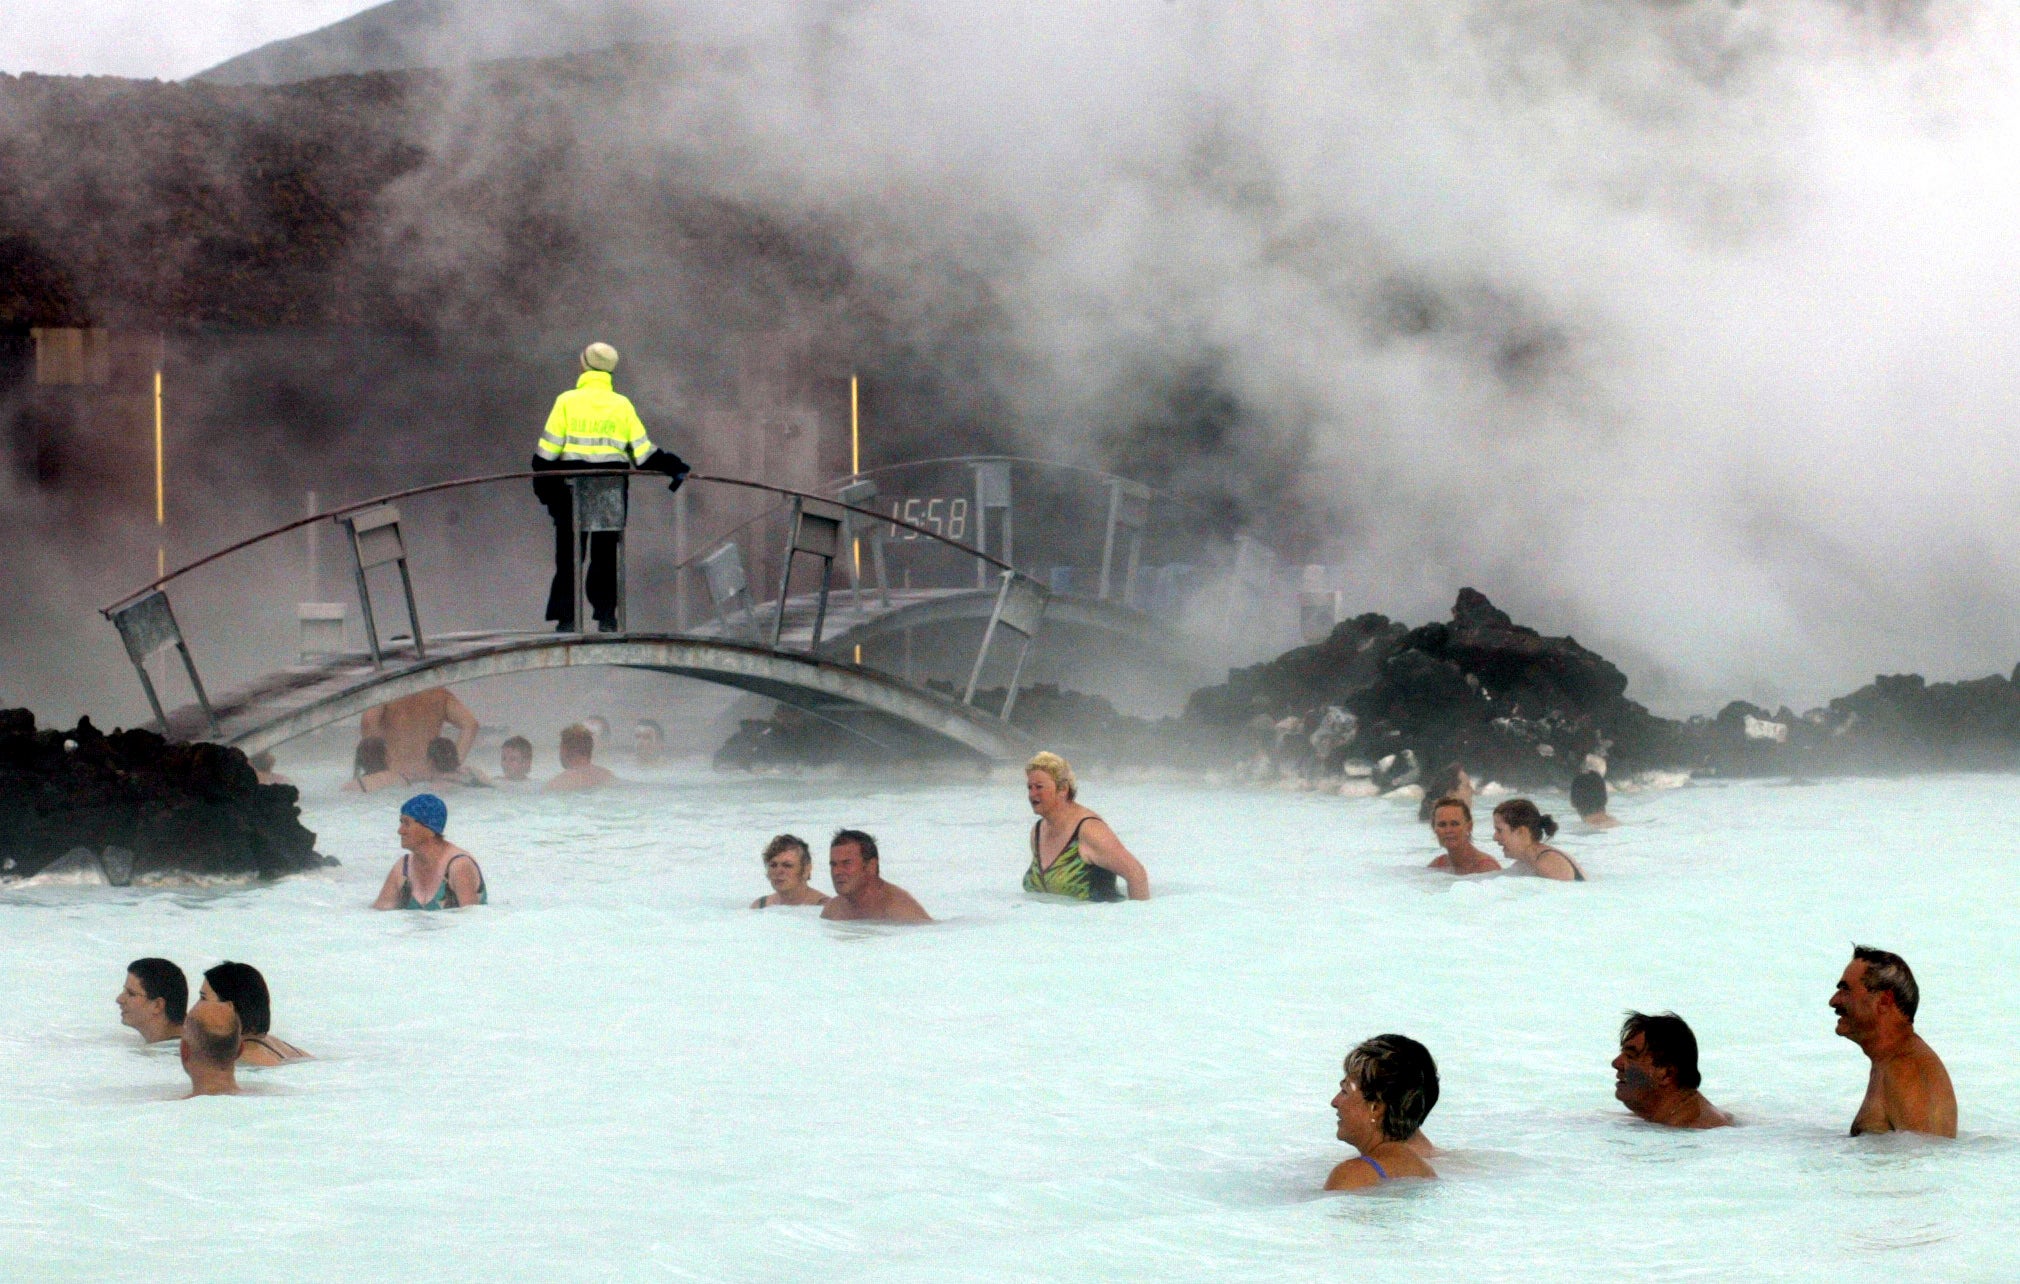 Iceland’s Blue Lagoon has been closed as a precuation